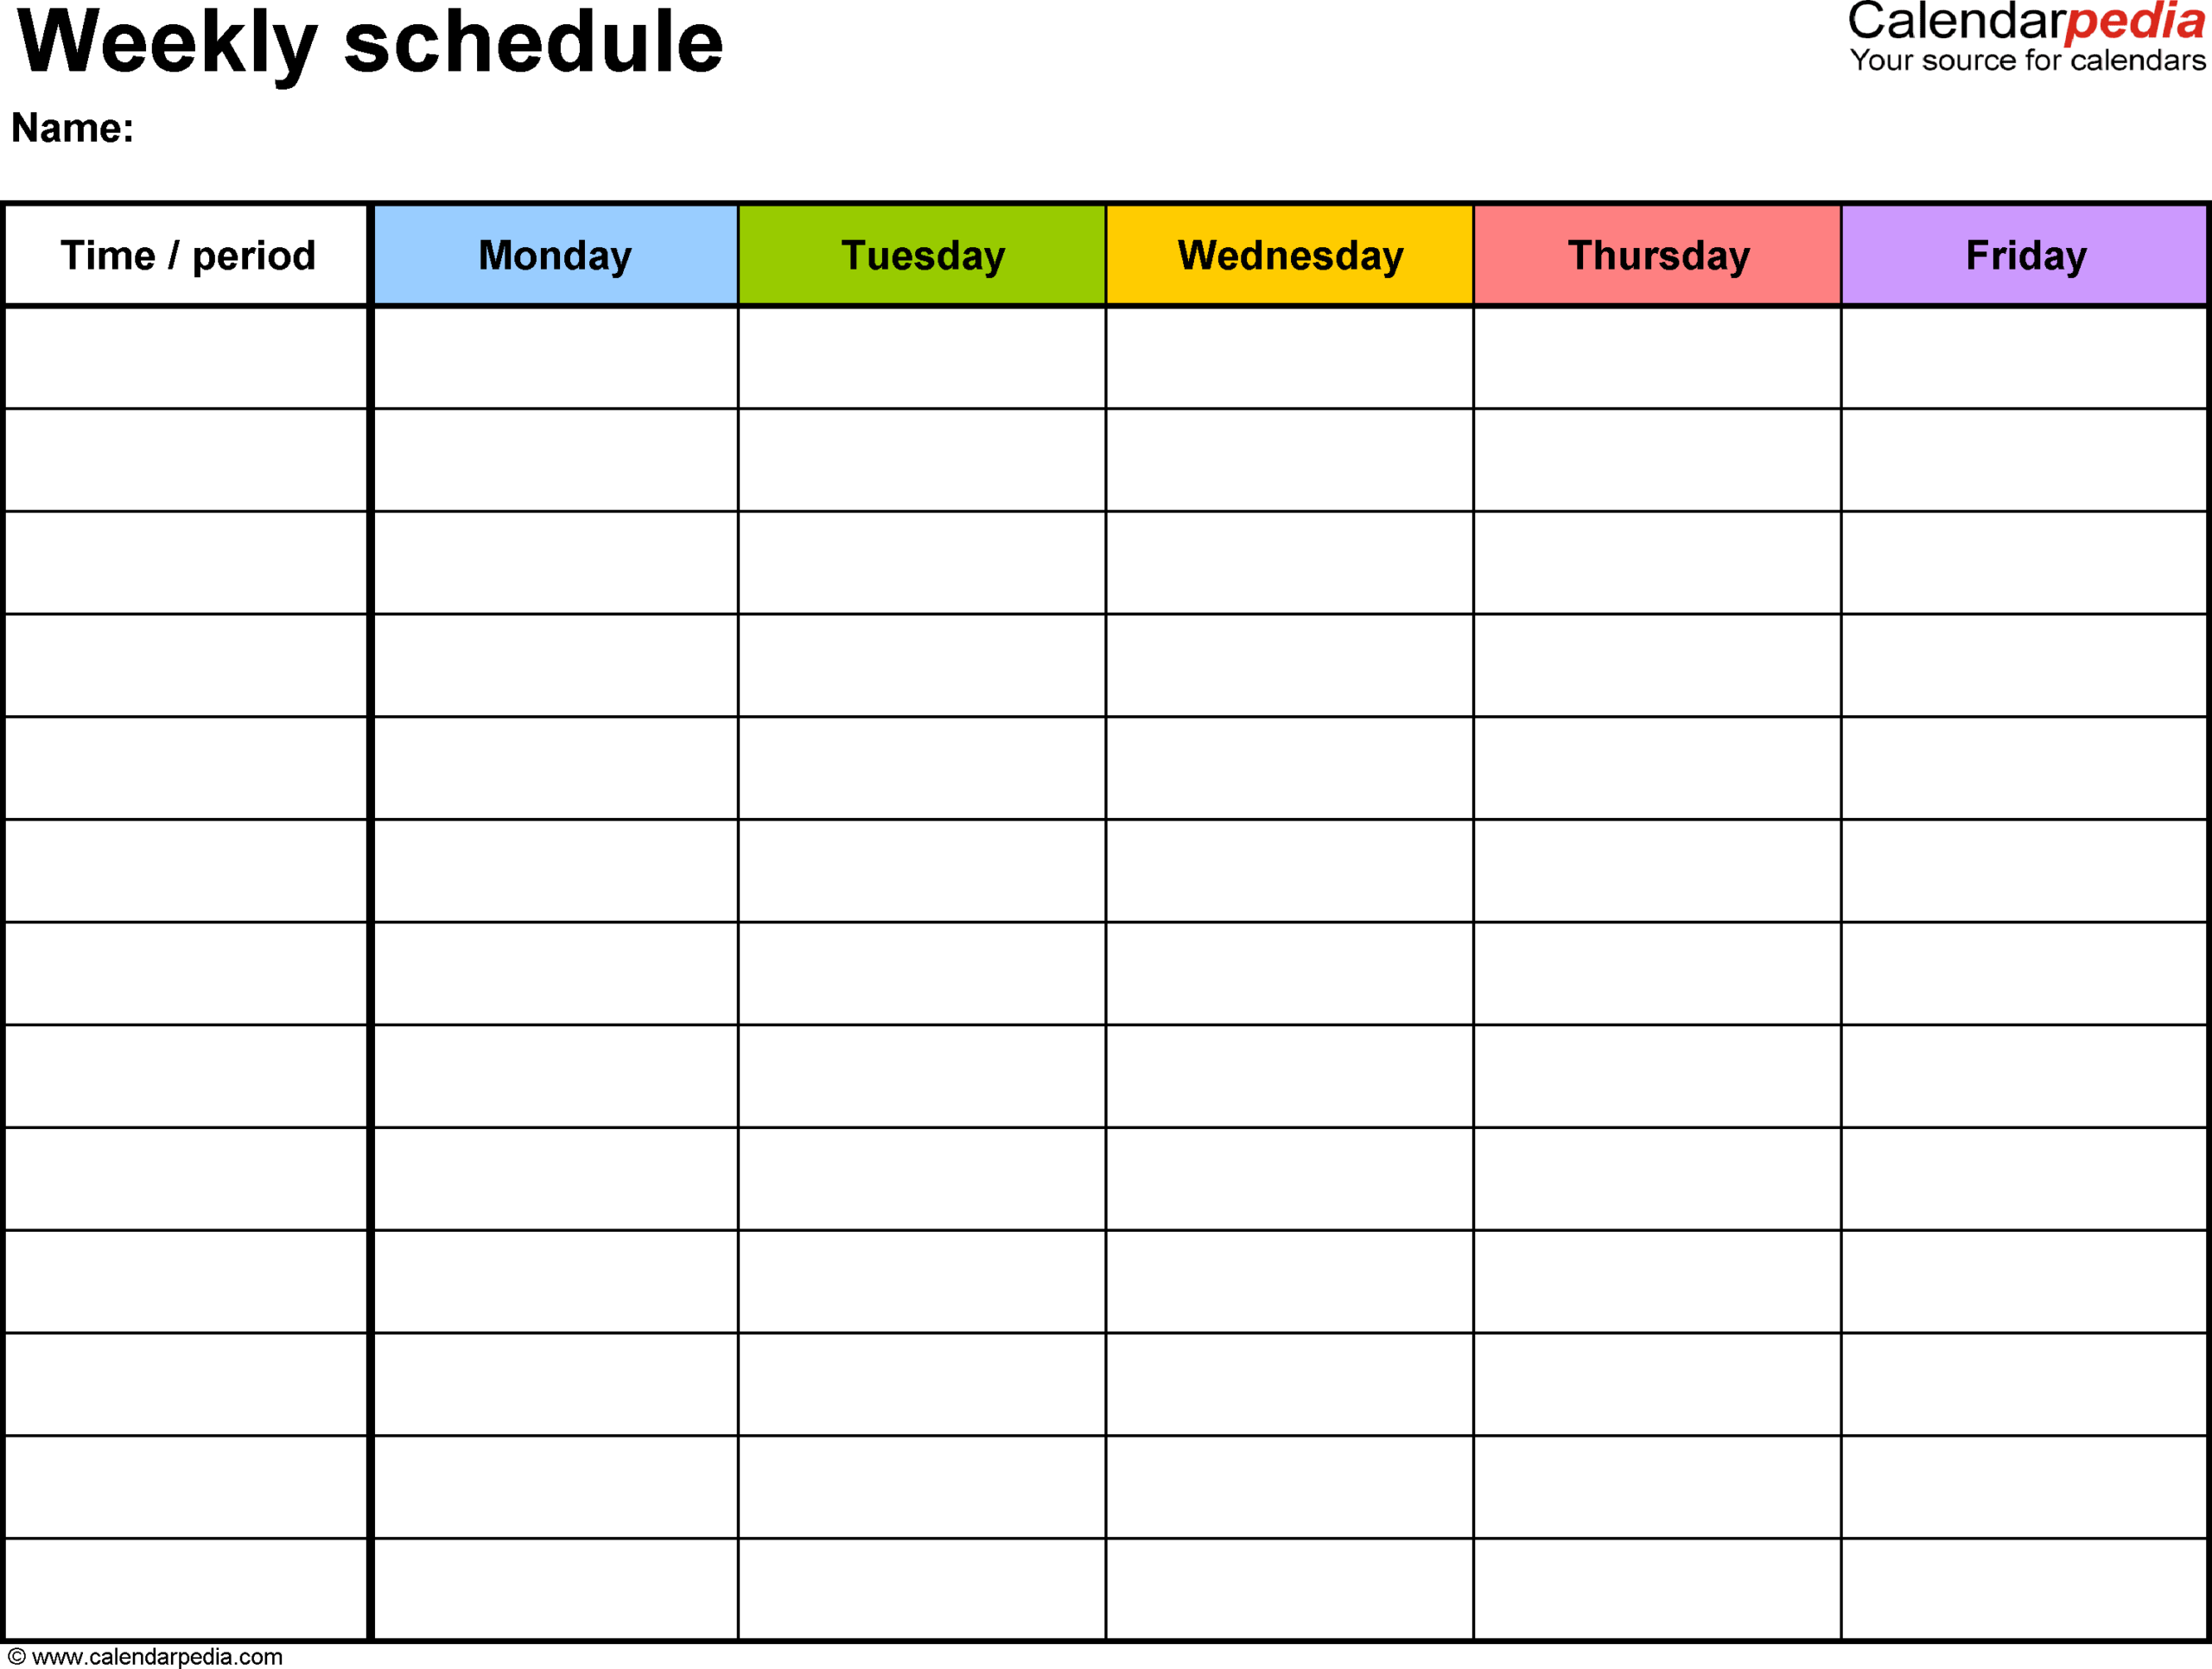 Free Weekly Schedule Templates For Excel – 18 Templates Regarding Monthly Meeting Schedule Template